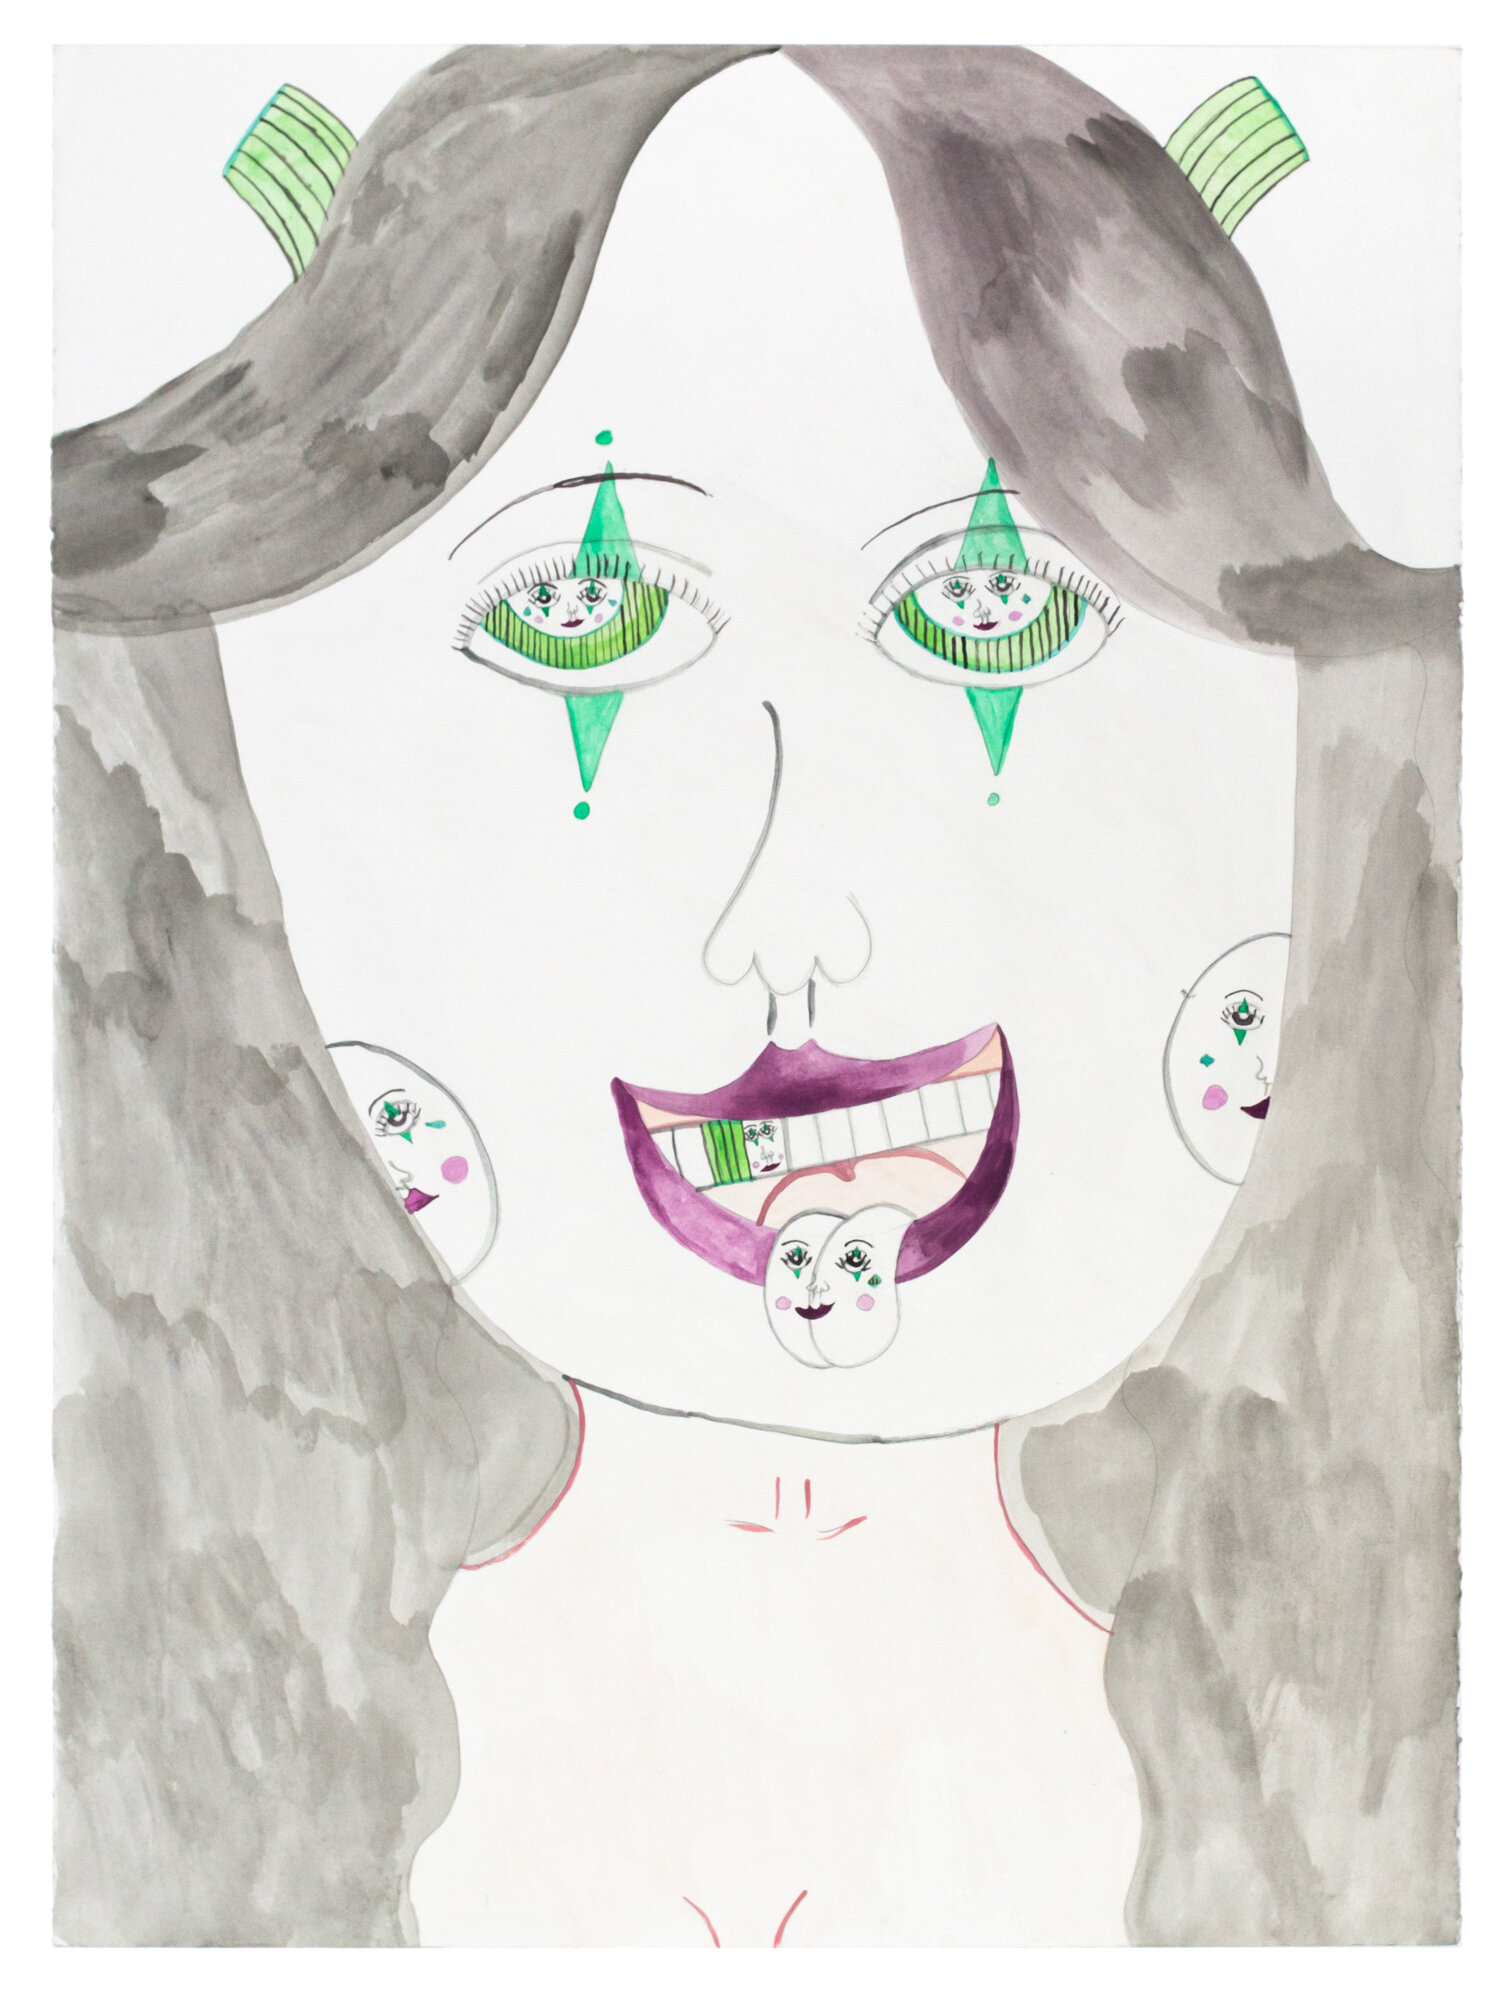 Aurie Ramirez, Untitled (AR 443), 2014, Watercolor on paper, 22.25 x 30 inches (Copy)